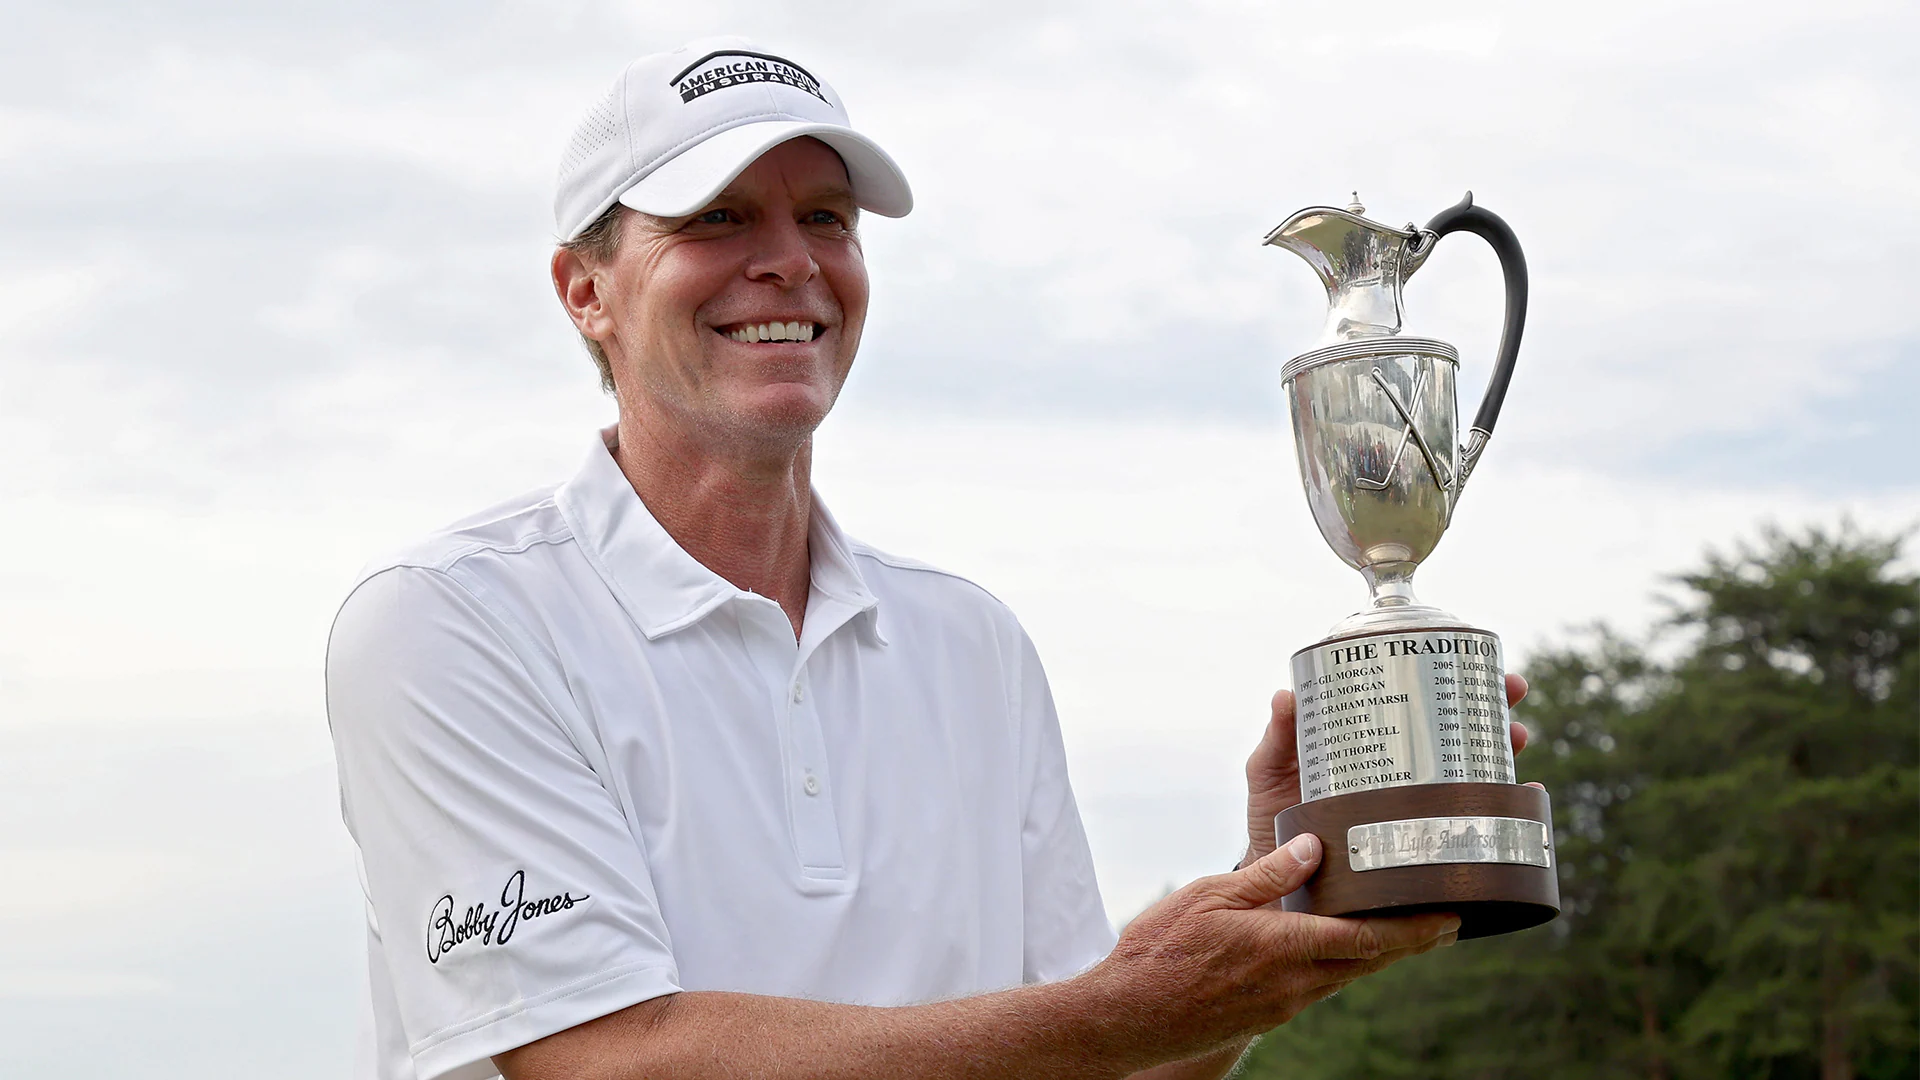 Shortly after bout with illness, Steve Stricker gets major win at Regions Tradition